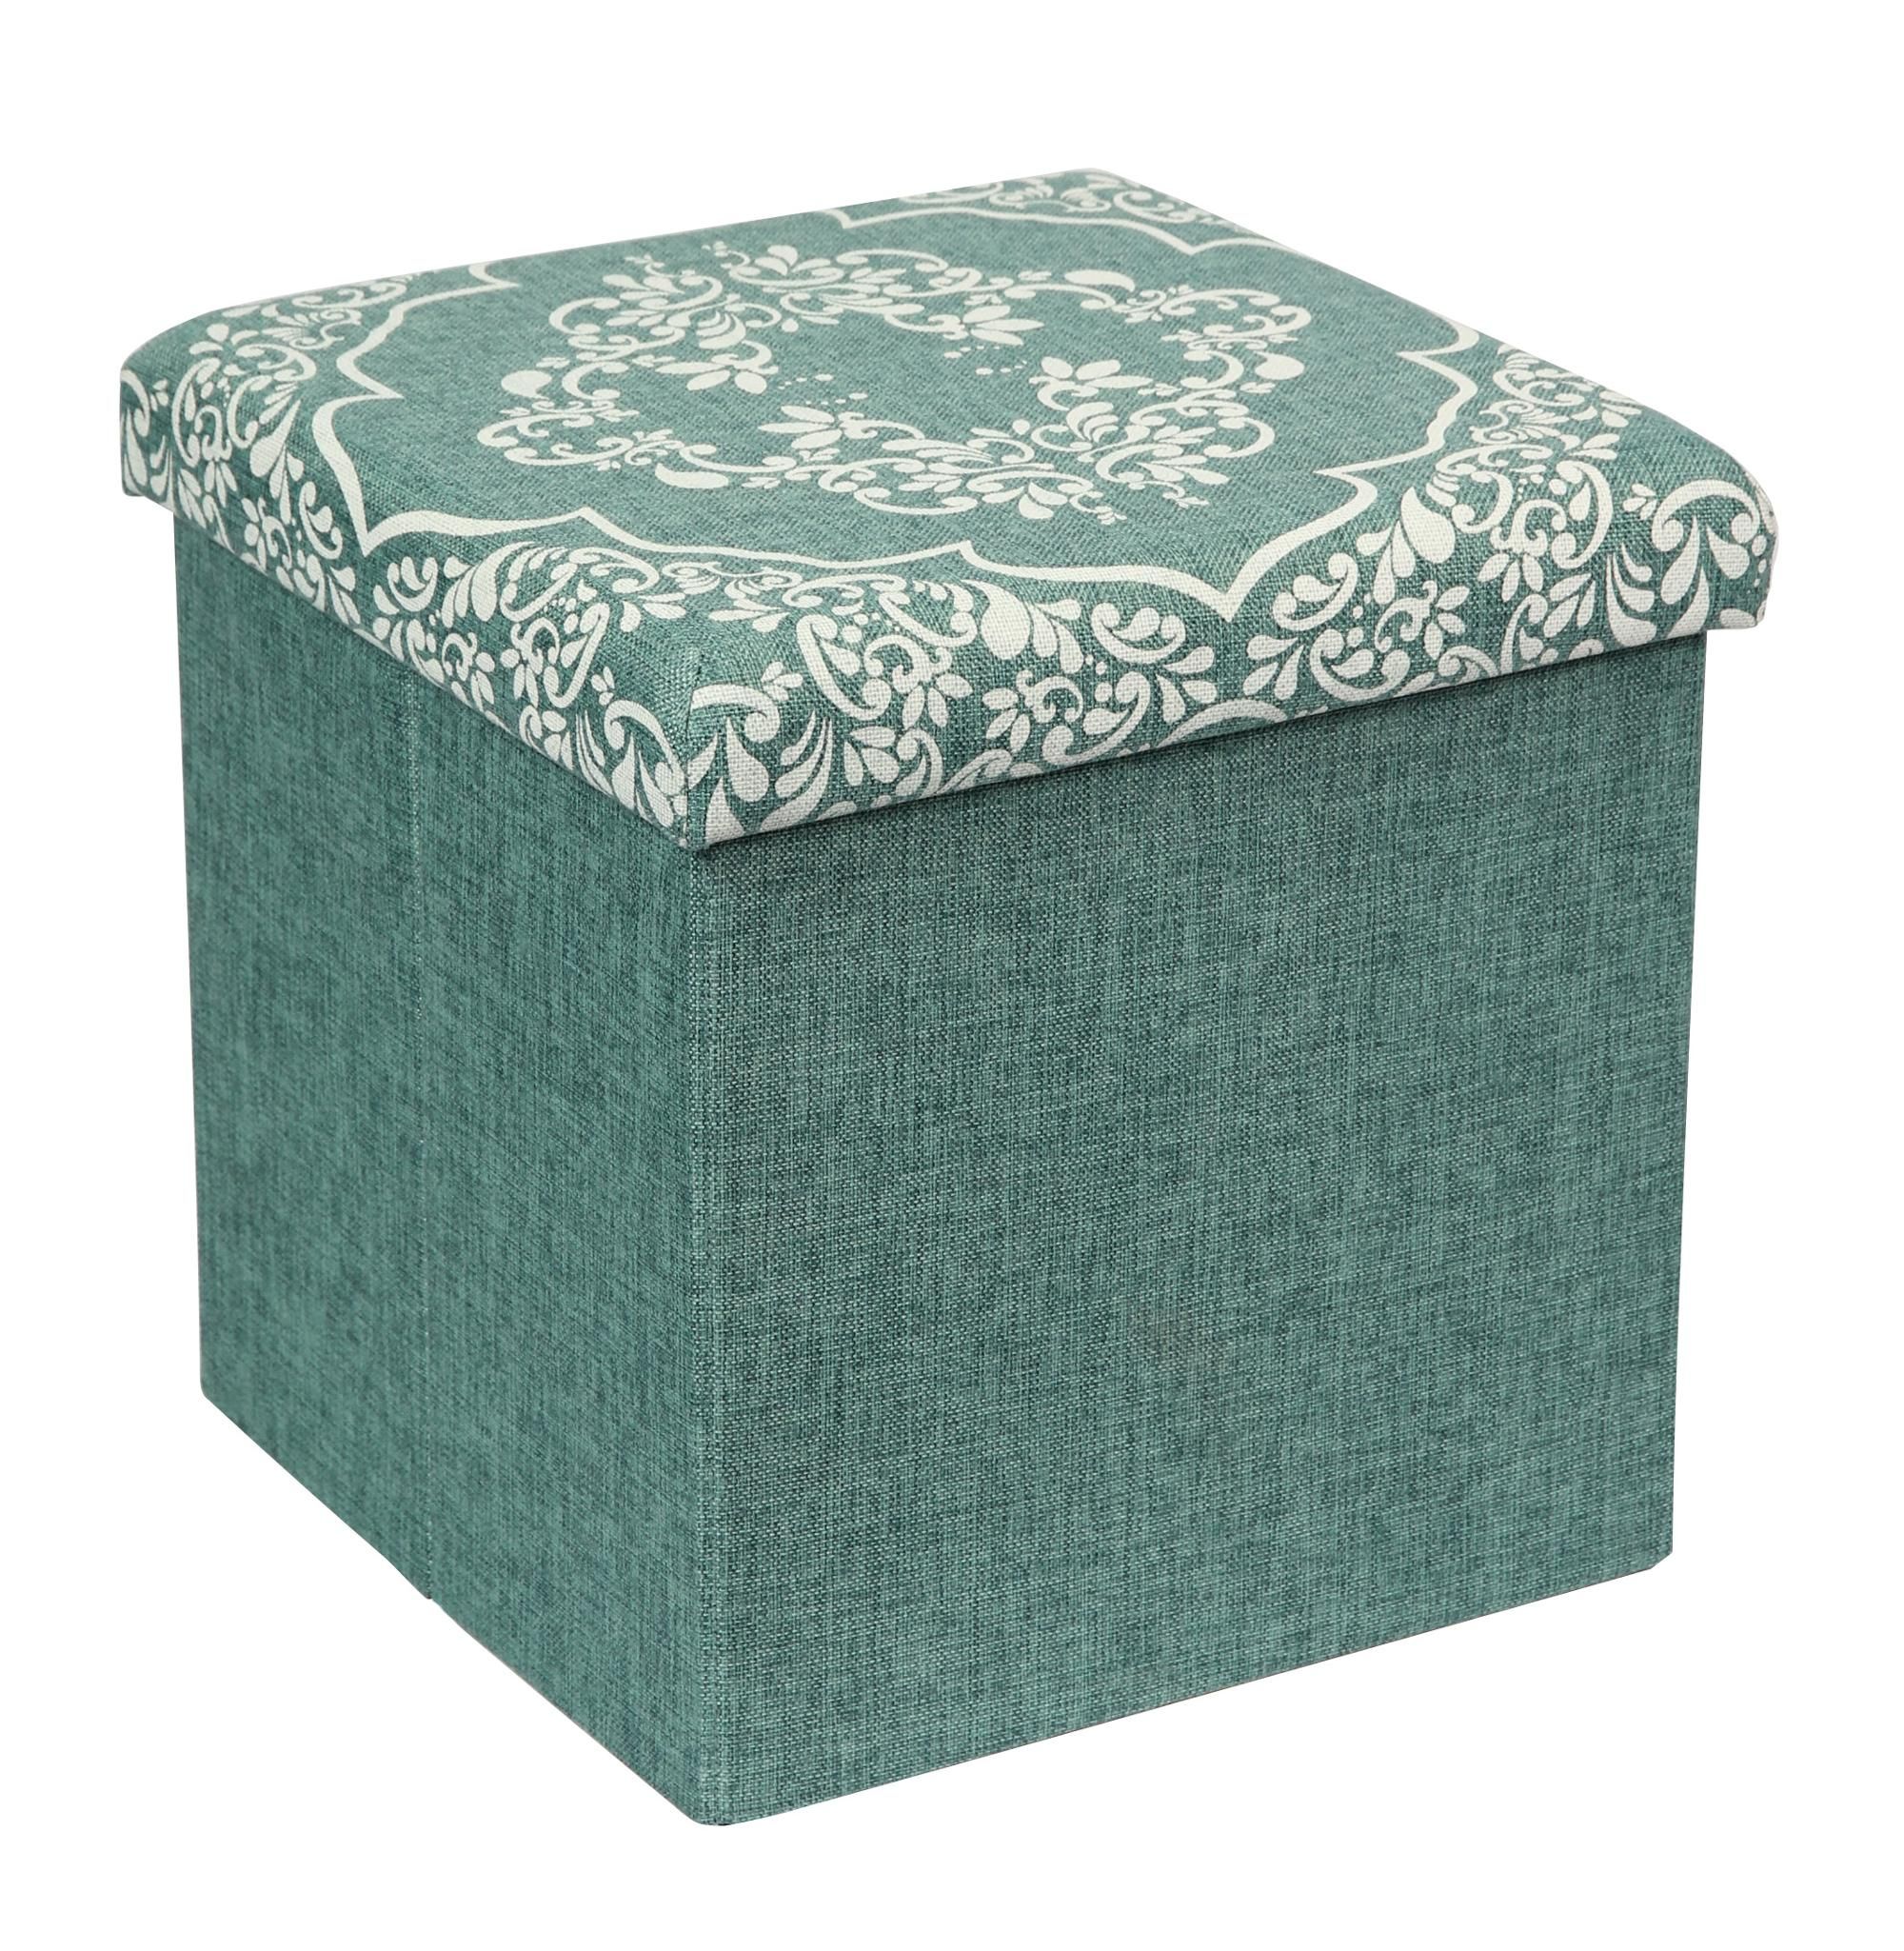 Faux Linen Fabric Printed Foot Rest Pouf Stool Folding Storage Ottoman Inside Fabric Storage Ottomans (View 20 of 20)